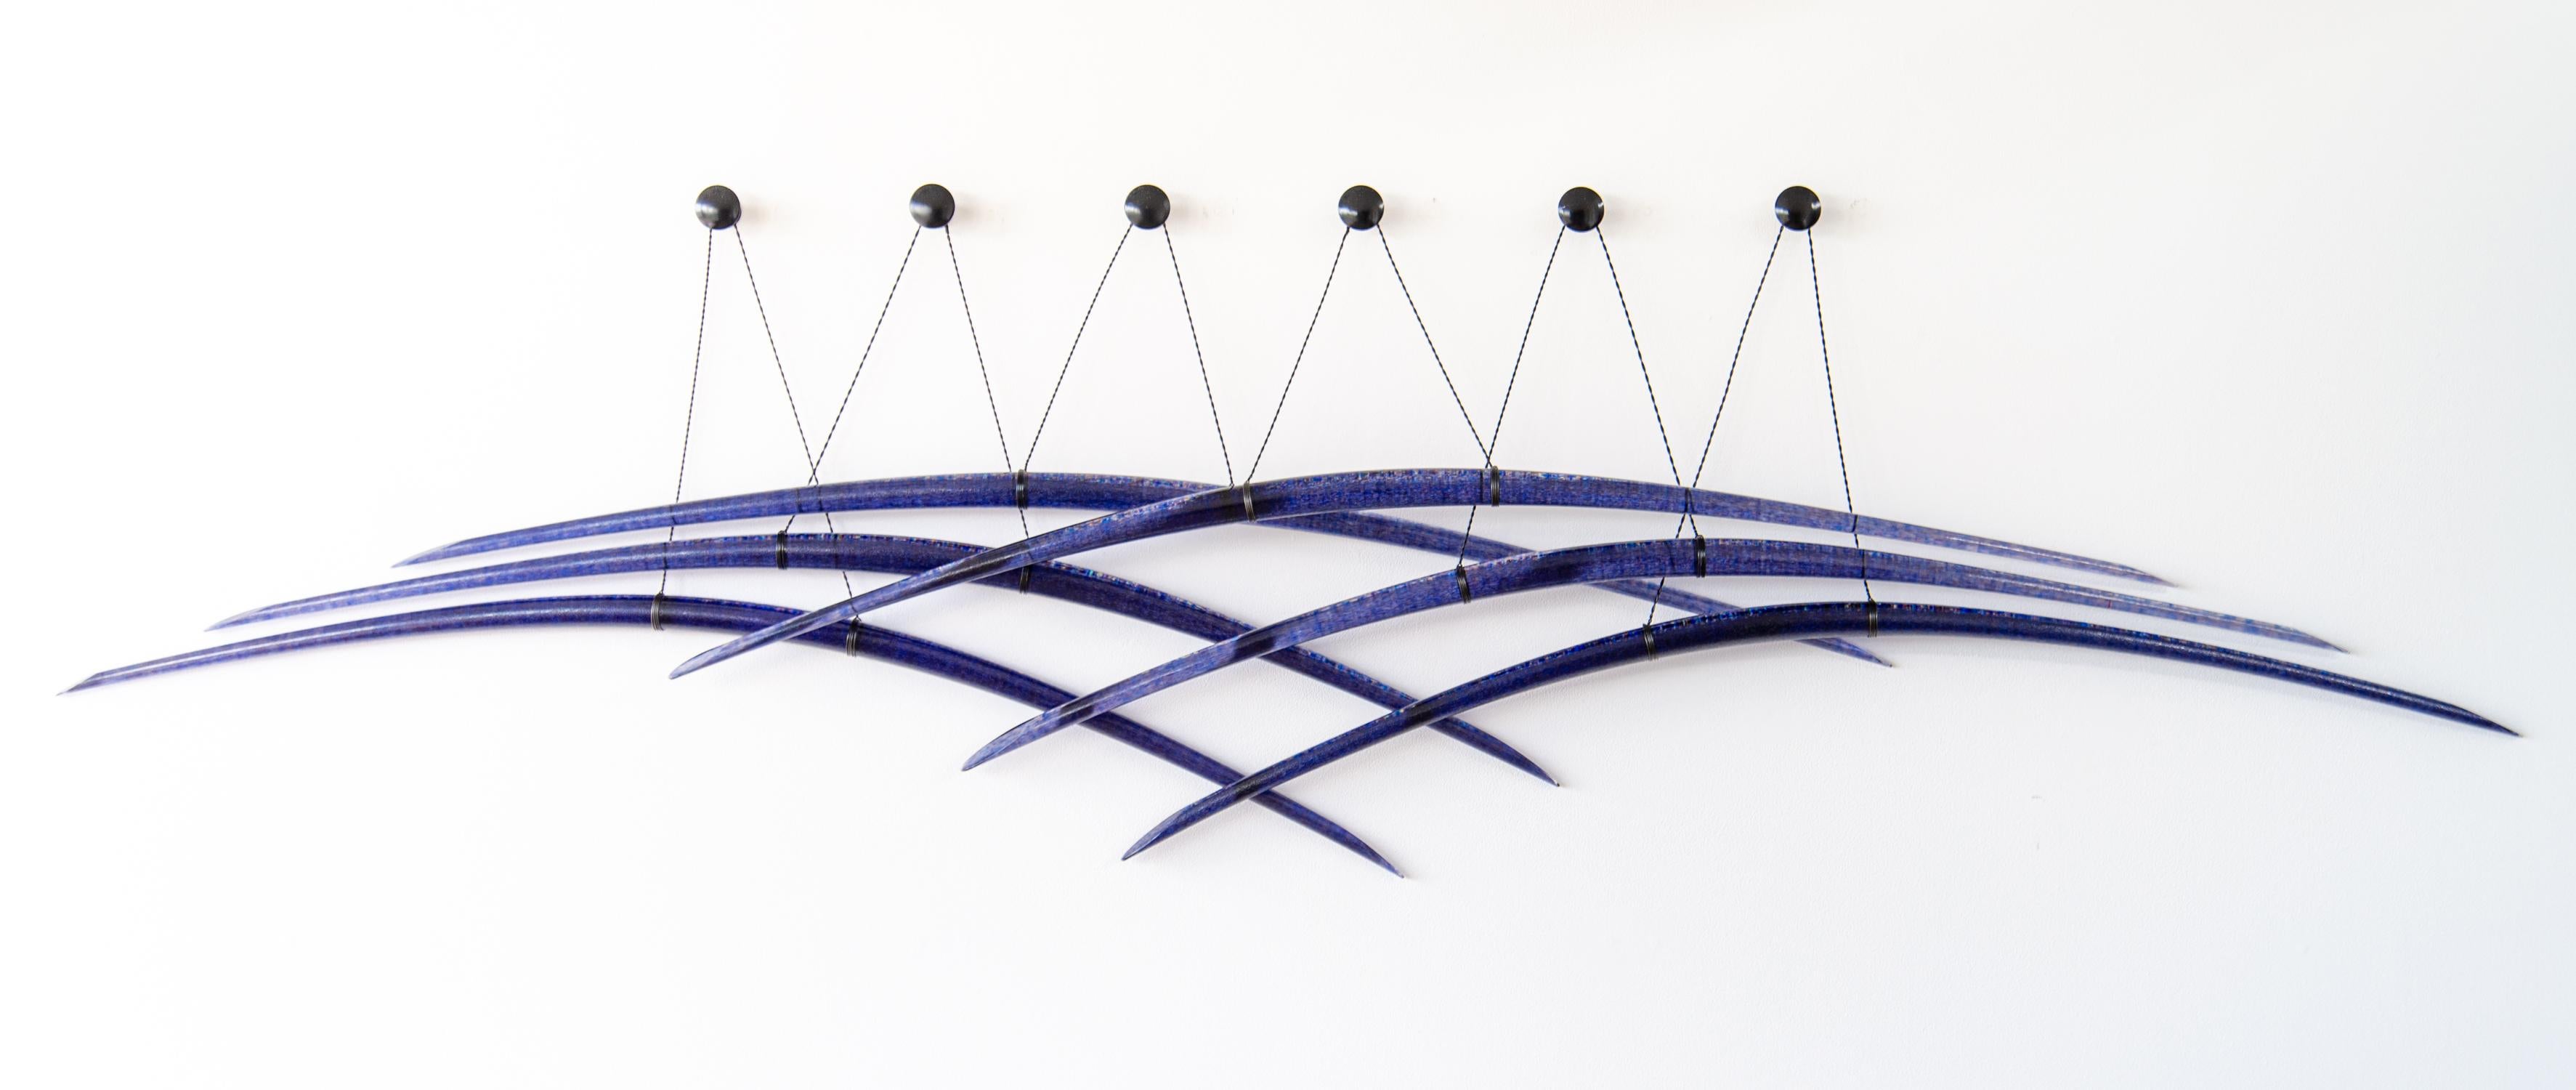 Probability Deep Blue 2 - abstract, curved, glass, suspended wall sculpture - Mixed Media Art by John Paul Robinson